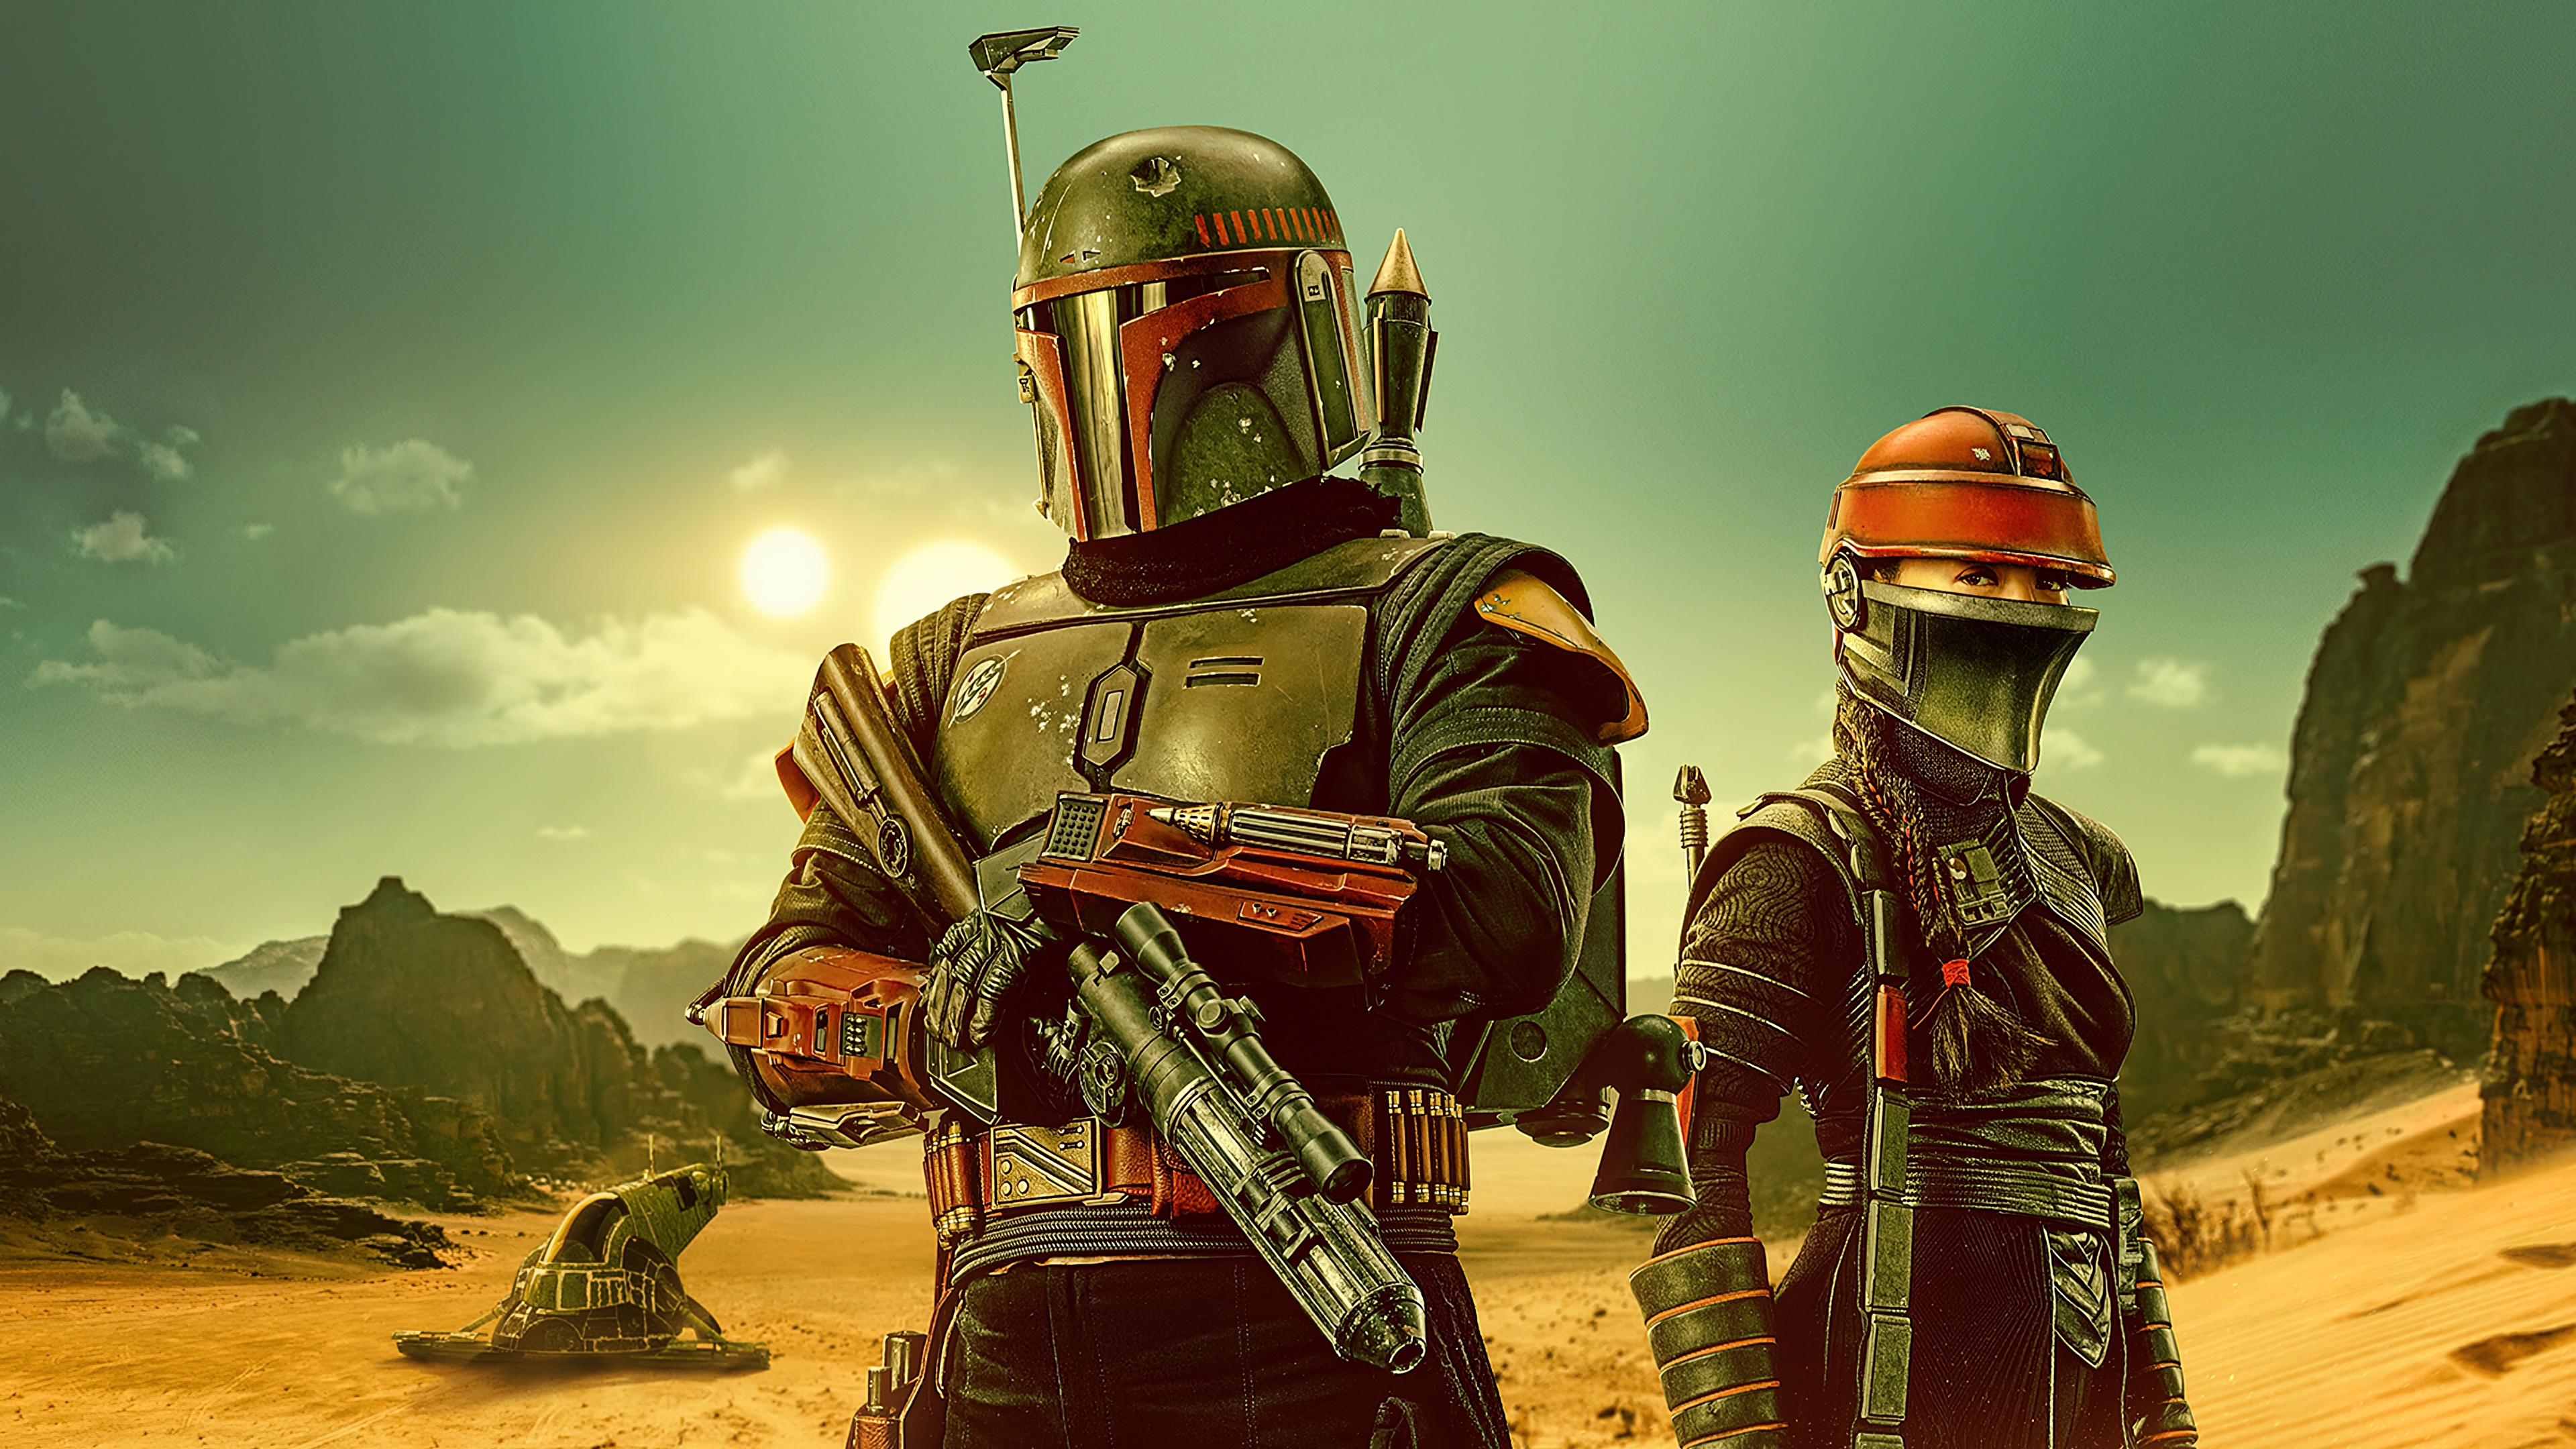 boba fett 1080P 2k 4k Full HD Wallpapers Backgrounds Free Download   Wallpaper Crafter